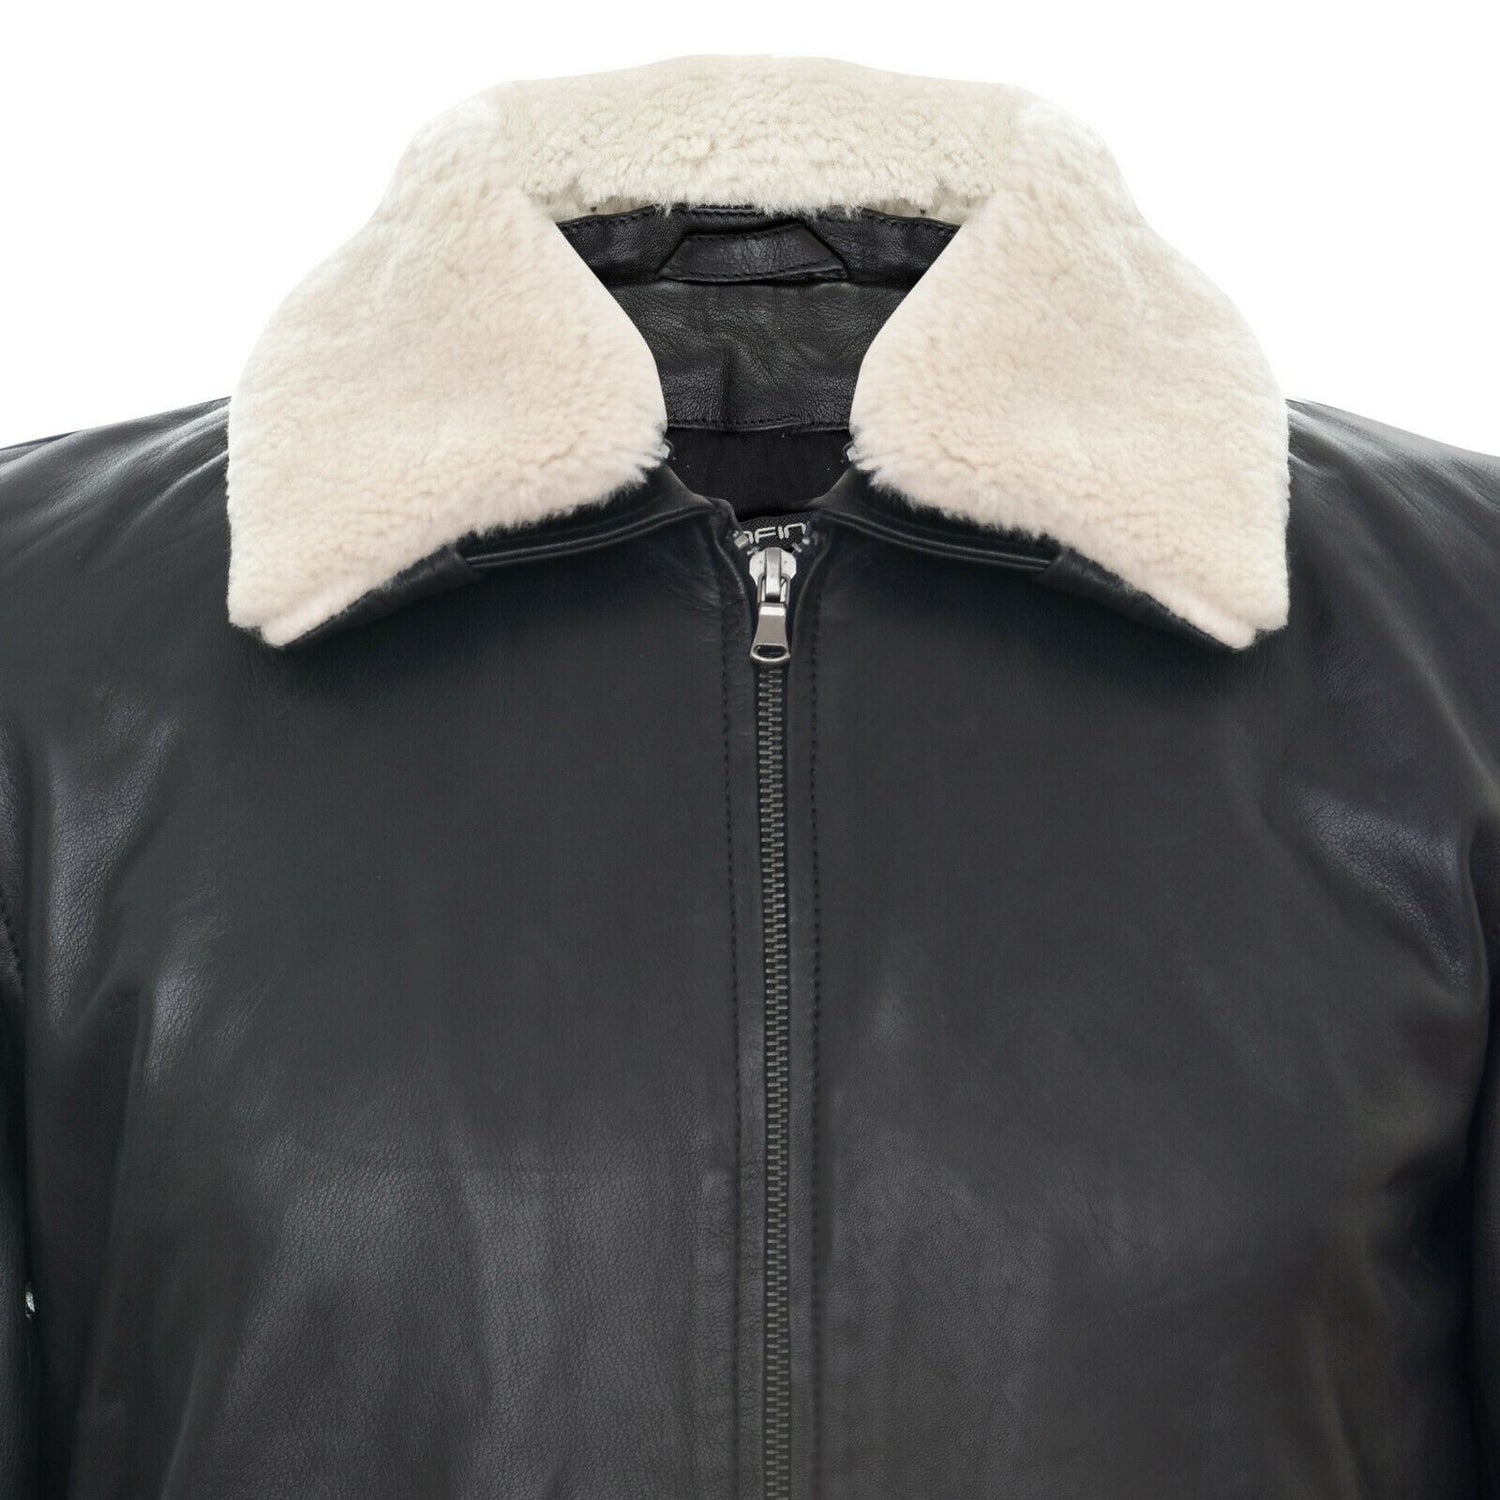 Black Leather Air Force Bomber Jacket with Detachable Collar - Miami